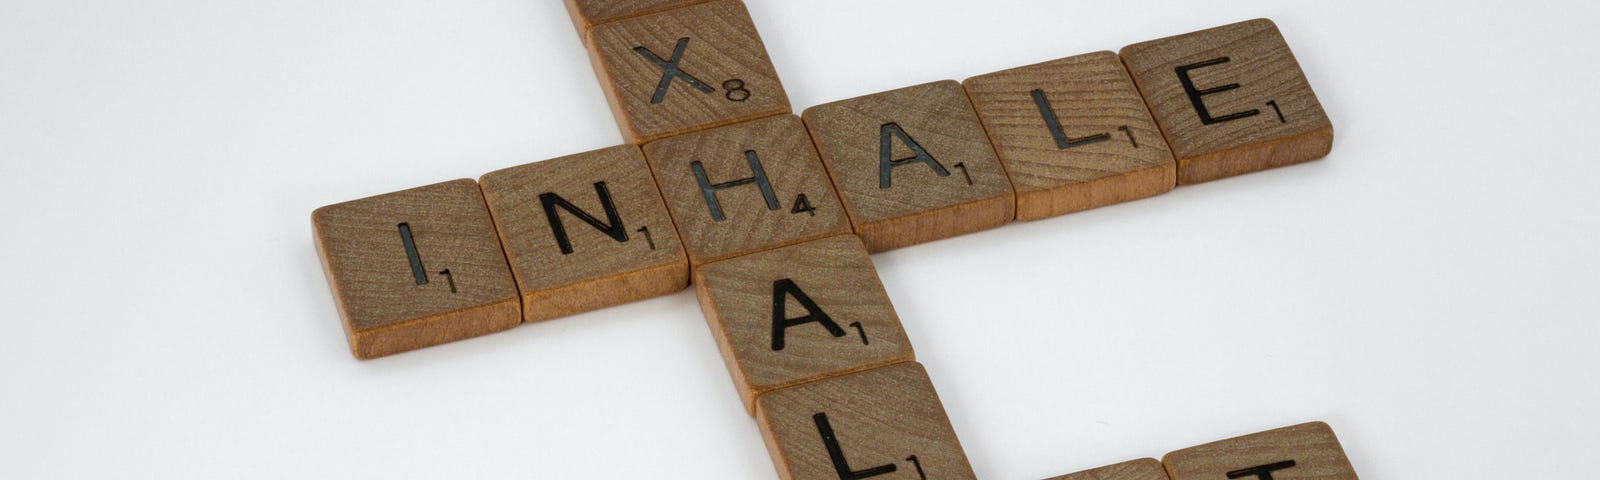 Scrabble tiles spelling out Inhale, Exhale, Repeat